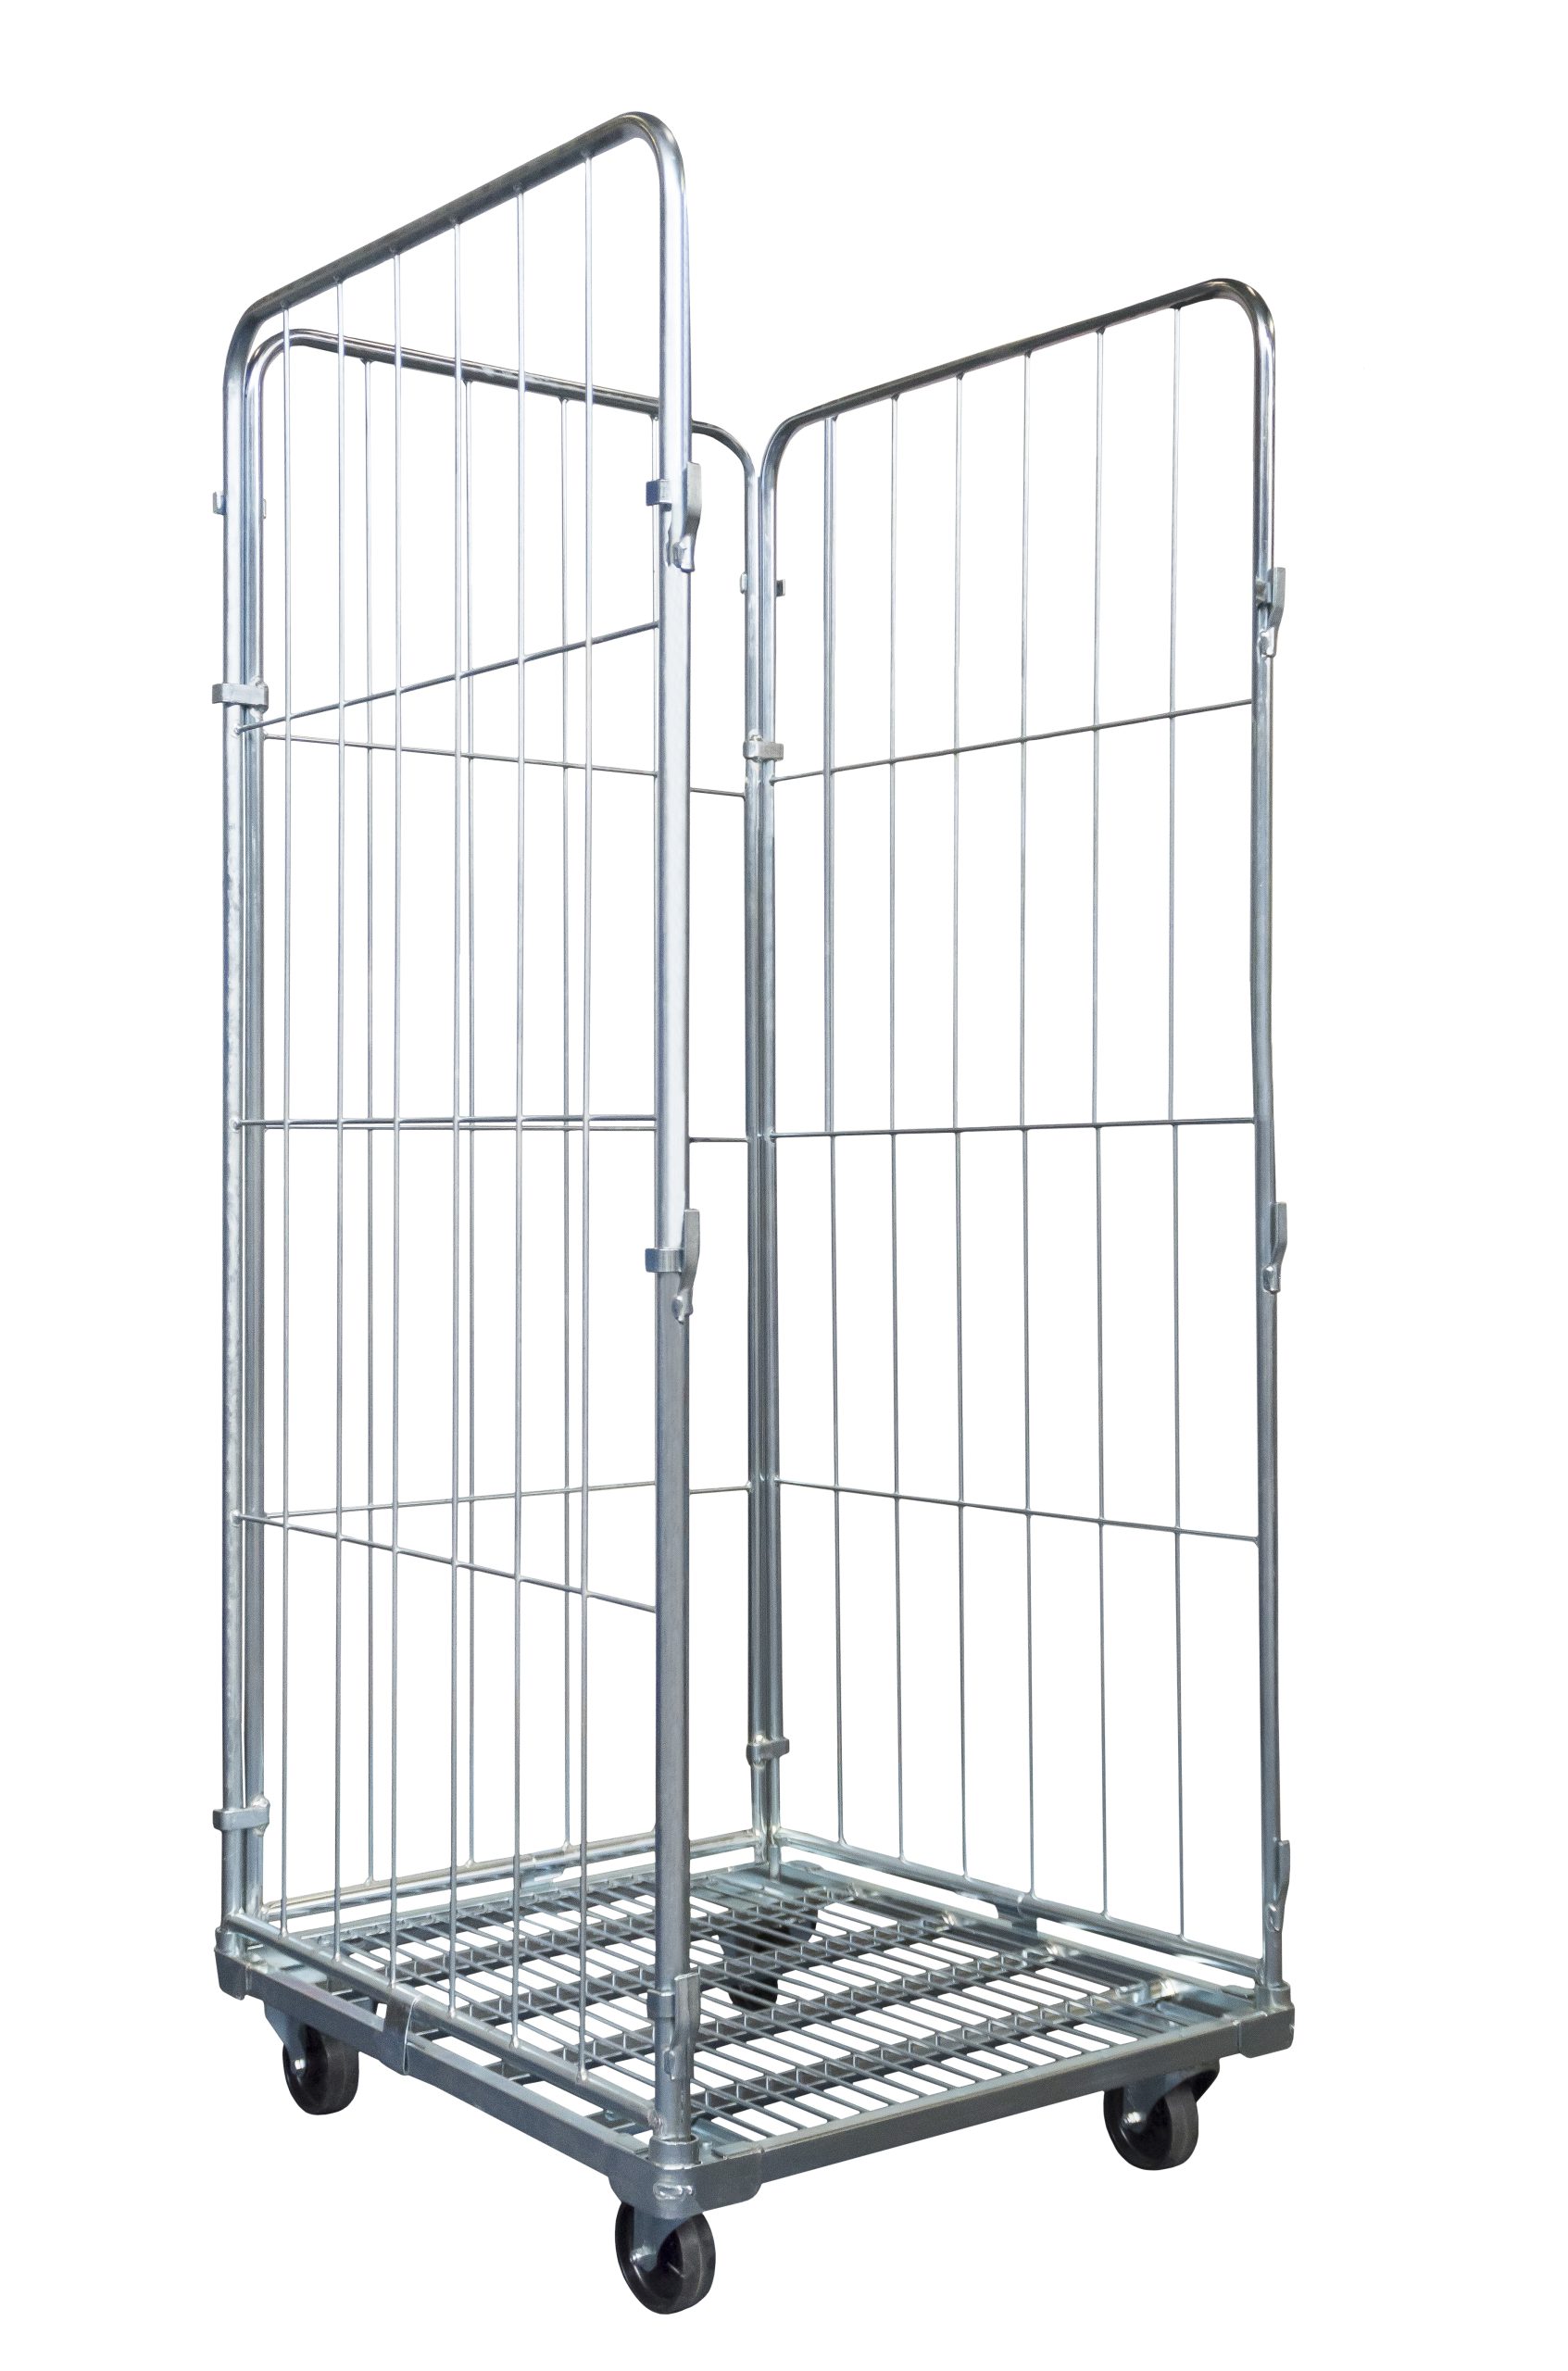 kg Load | 800x720x1800 mm 400 Rotomrent for Cage rent Gate, Front Container Laundry Capacity Hinged Roll